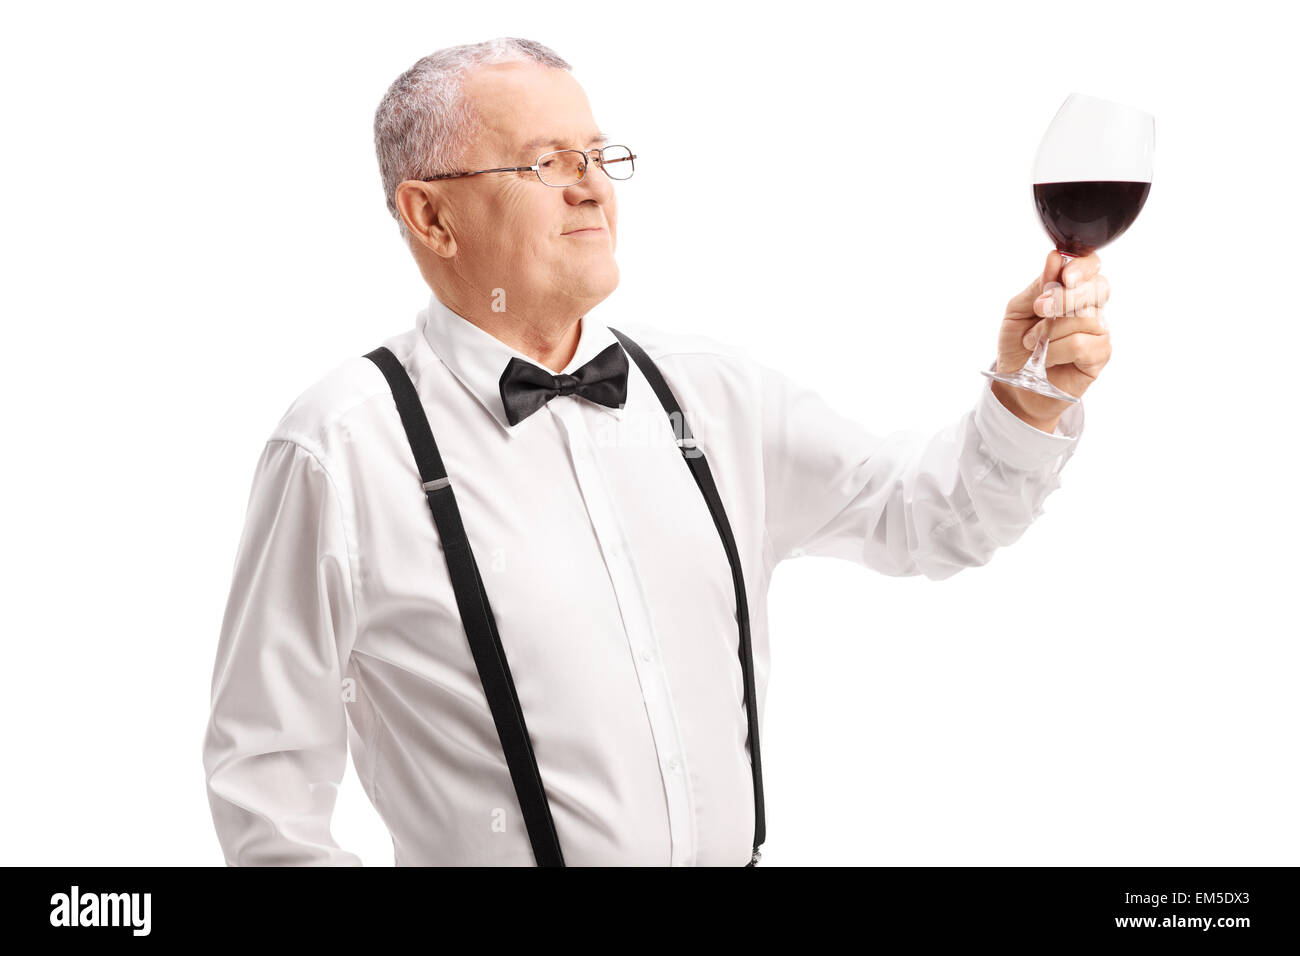 Classy senior gentleman looking at a glass full of red wine isolated on white background Stock Photo